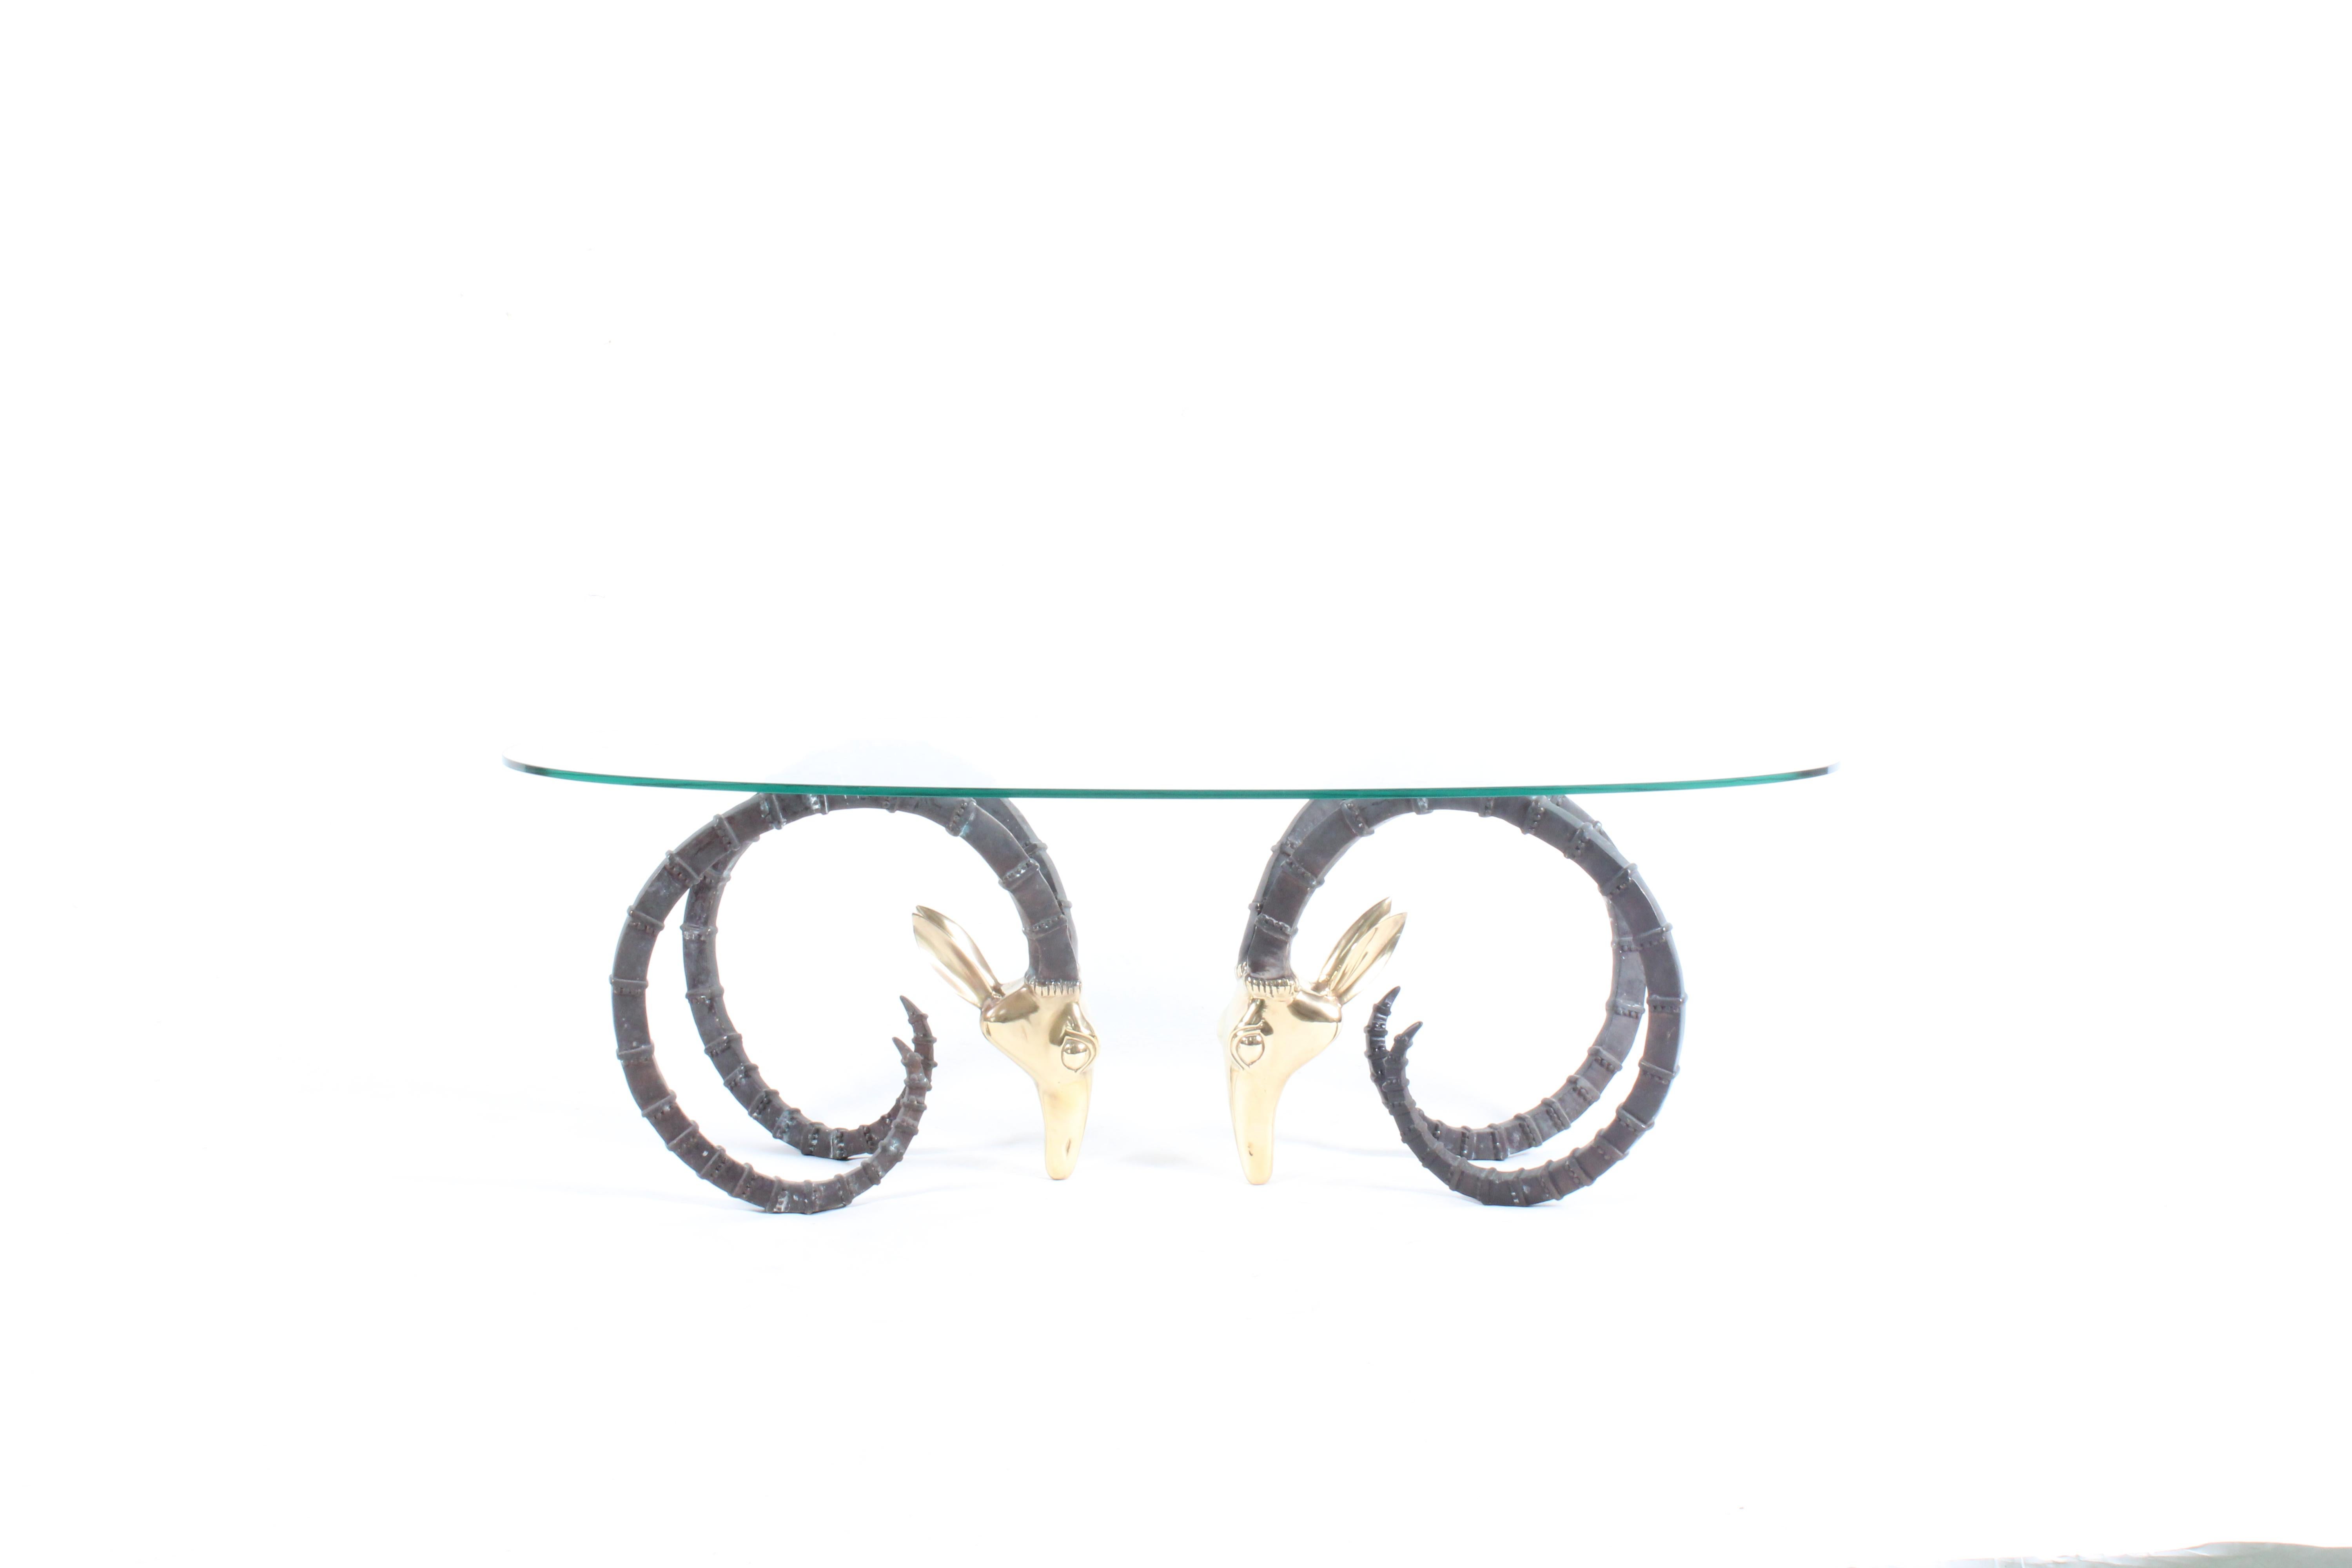 A stunning piece combing two vintage sculptural ibex or rams brass head bases which have highly polished heads and contrasting matt black painted horns on top of which is set an eliptical tempered glass top. Sourced from a private collector in Paris